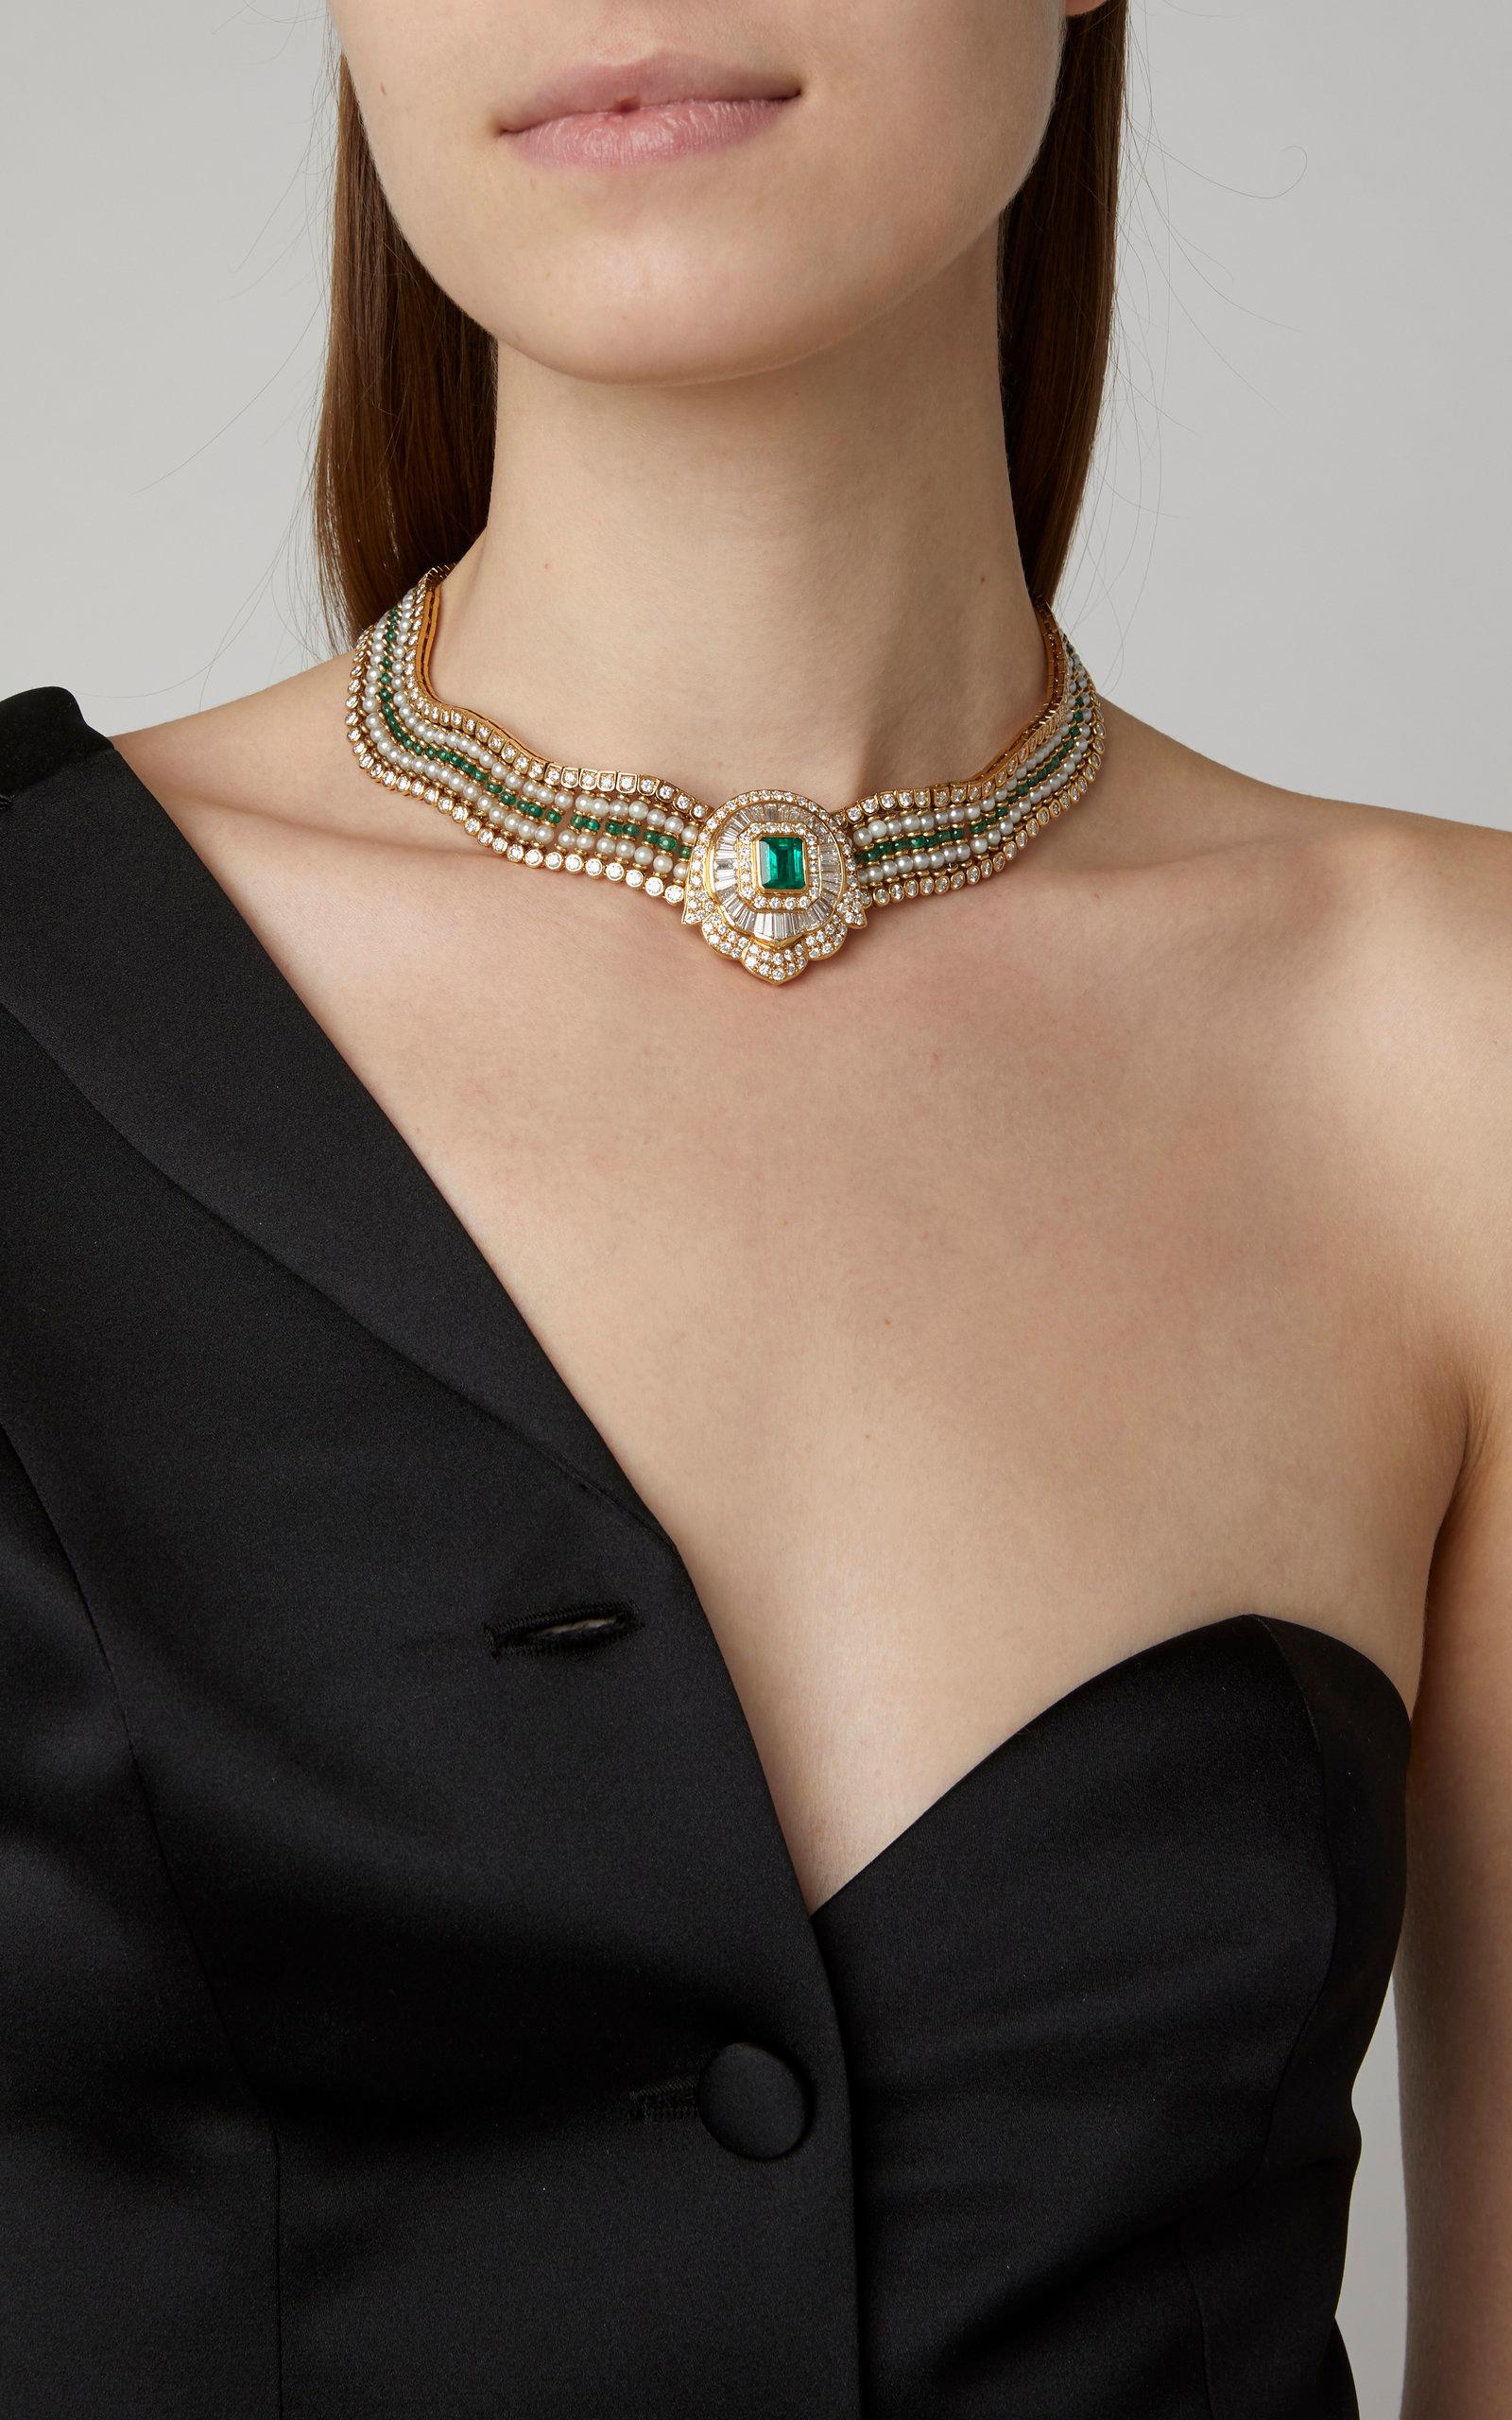 An exquisite necklace of undulated design, with emeralds, diamonds, and pearls, the central emerald weighing 4.5 carats, while the diamonds 25 carats total, mounted on 18kt yellow gold. Made in Italy, circa 1965.